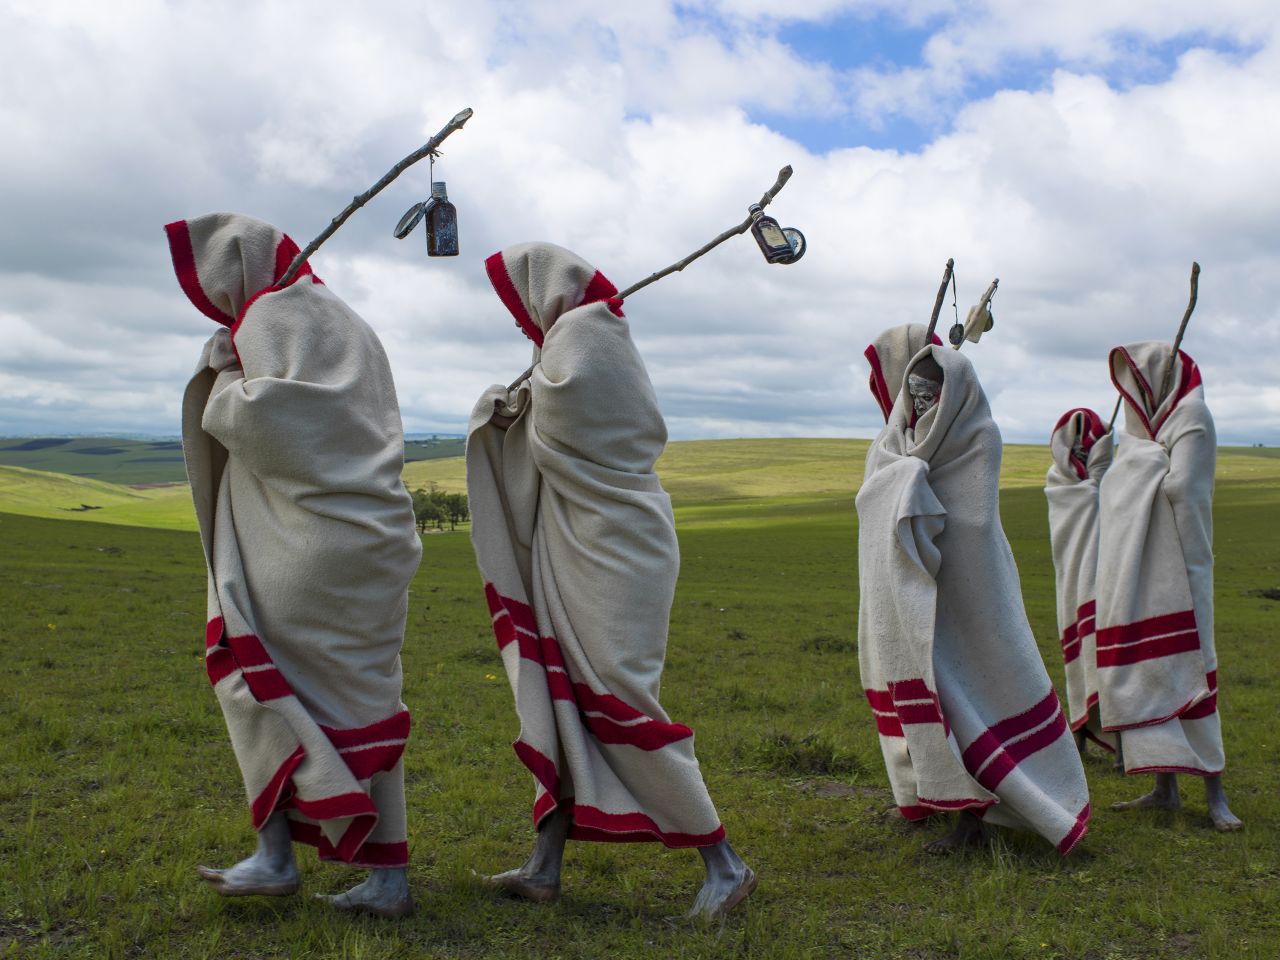 In Eastern Cape, South Africa, young Xhosa men take part in a coming of age initiation called<em> Ulwaluko</em>. The youths, known as <em>abakhwetha</em>, are first circumcised without anesthetic, and must live in the bush with minimal supplies. Wearing white clay on their faces, initiates will fend for themselves for up to two months, living in a structure built by the village's adult community specifically for<em> Ulwaluko</em>. Upon their return they are no longer referred to as "boy" and receive a new blanket. The initiation has not been without its criticisms, due to <a href="http://www.bbc.co.uk/news/world-africa-19256839" target="_blank" target="_blank">complications and malpractice</a> surrounding the circumcision process.